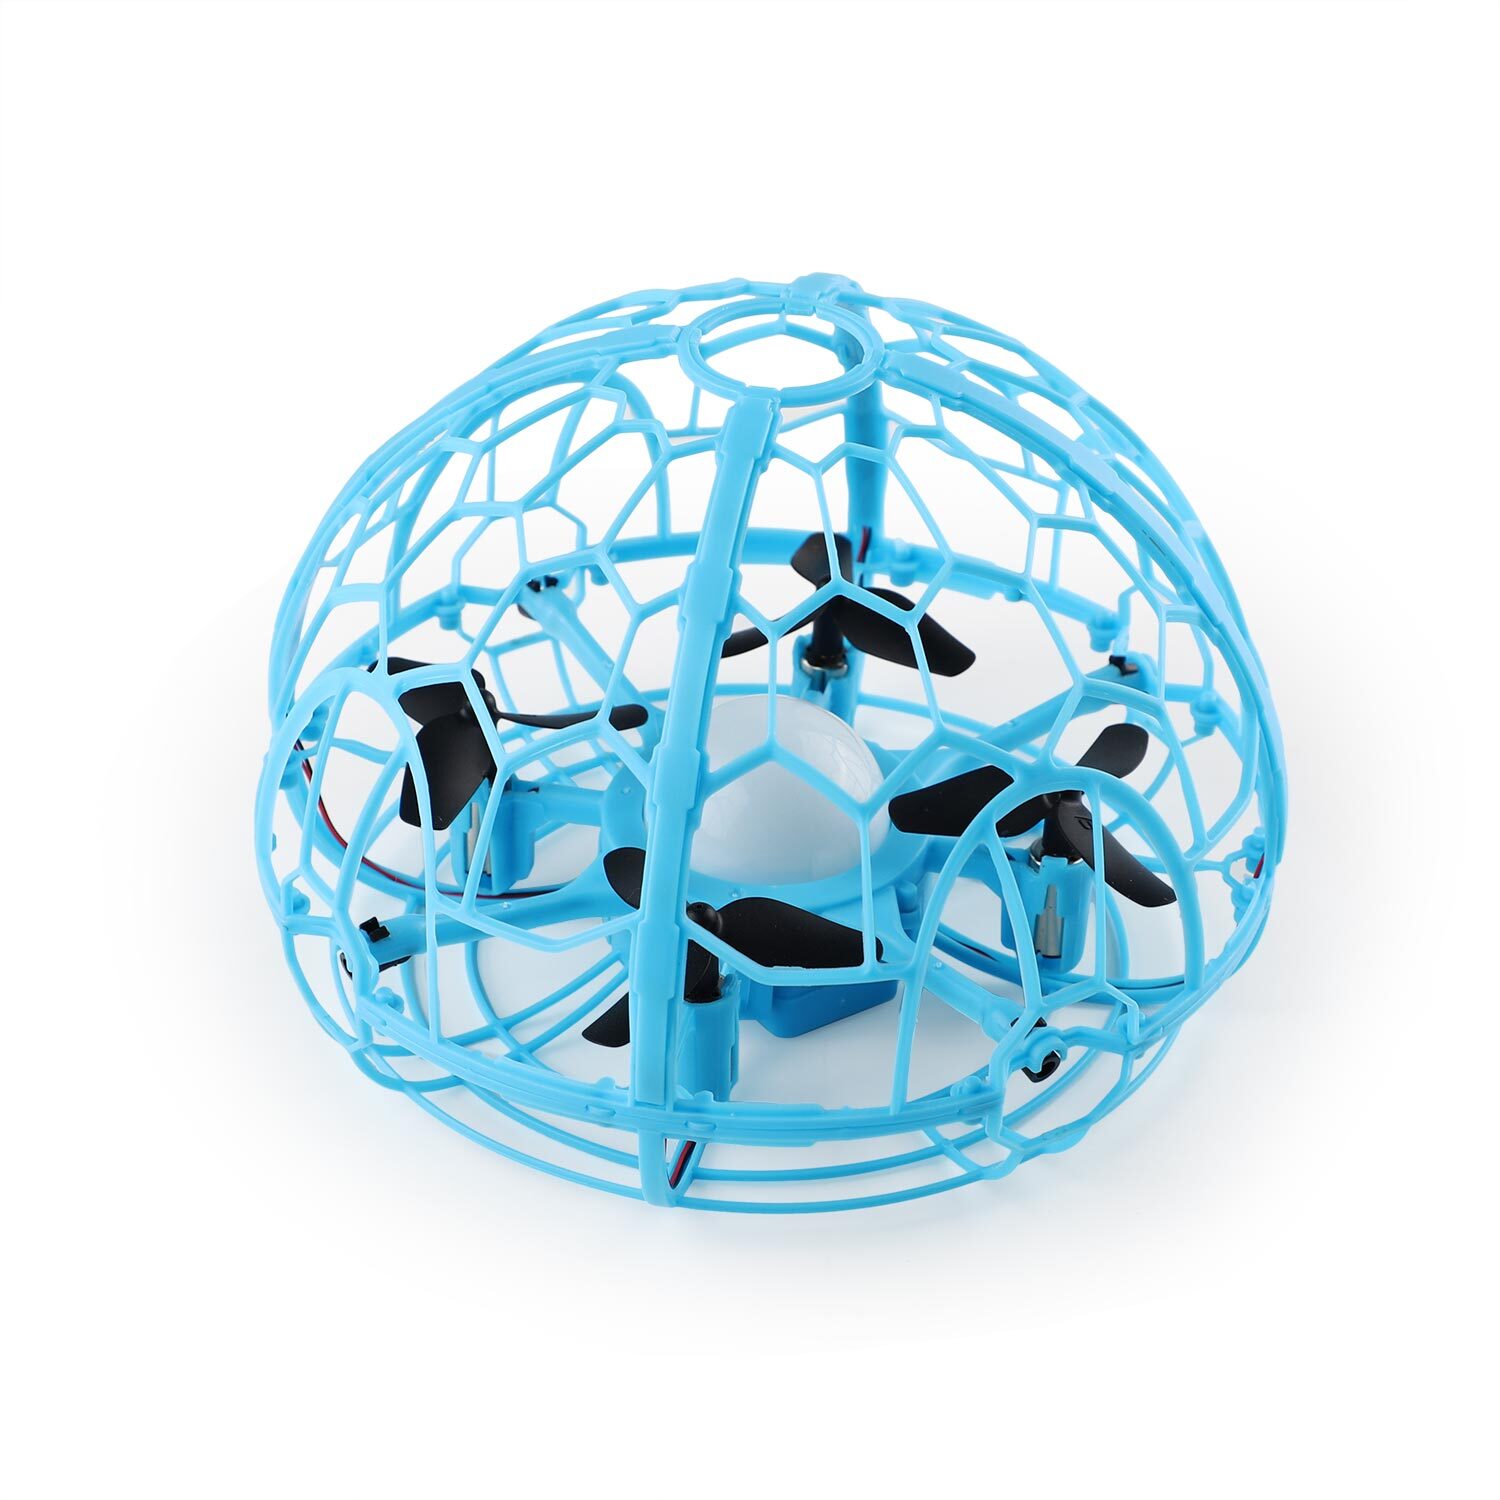 The Best Hand Controlled Drone On The Market!